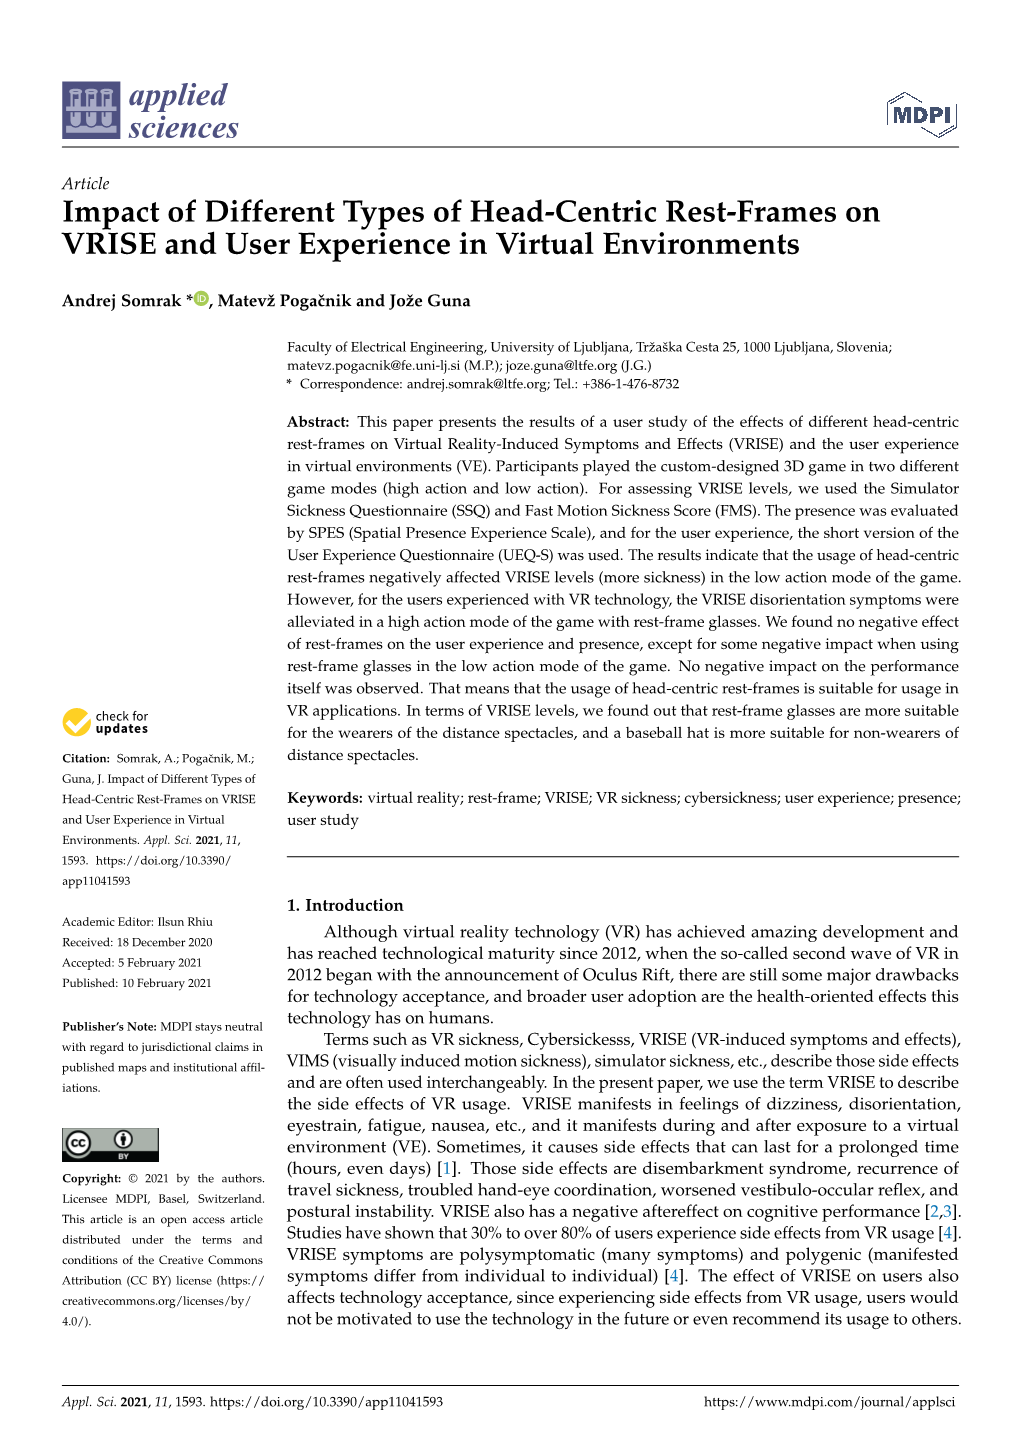 Impact of Different Types of Head-Centric Rest-Frames on VRISE and User Experience in Virtual Environments